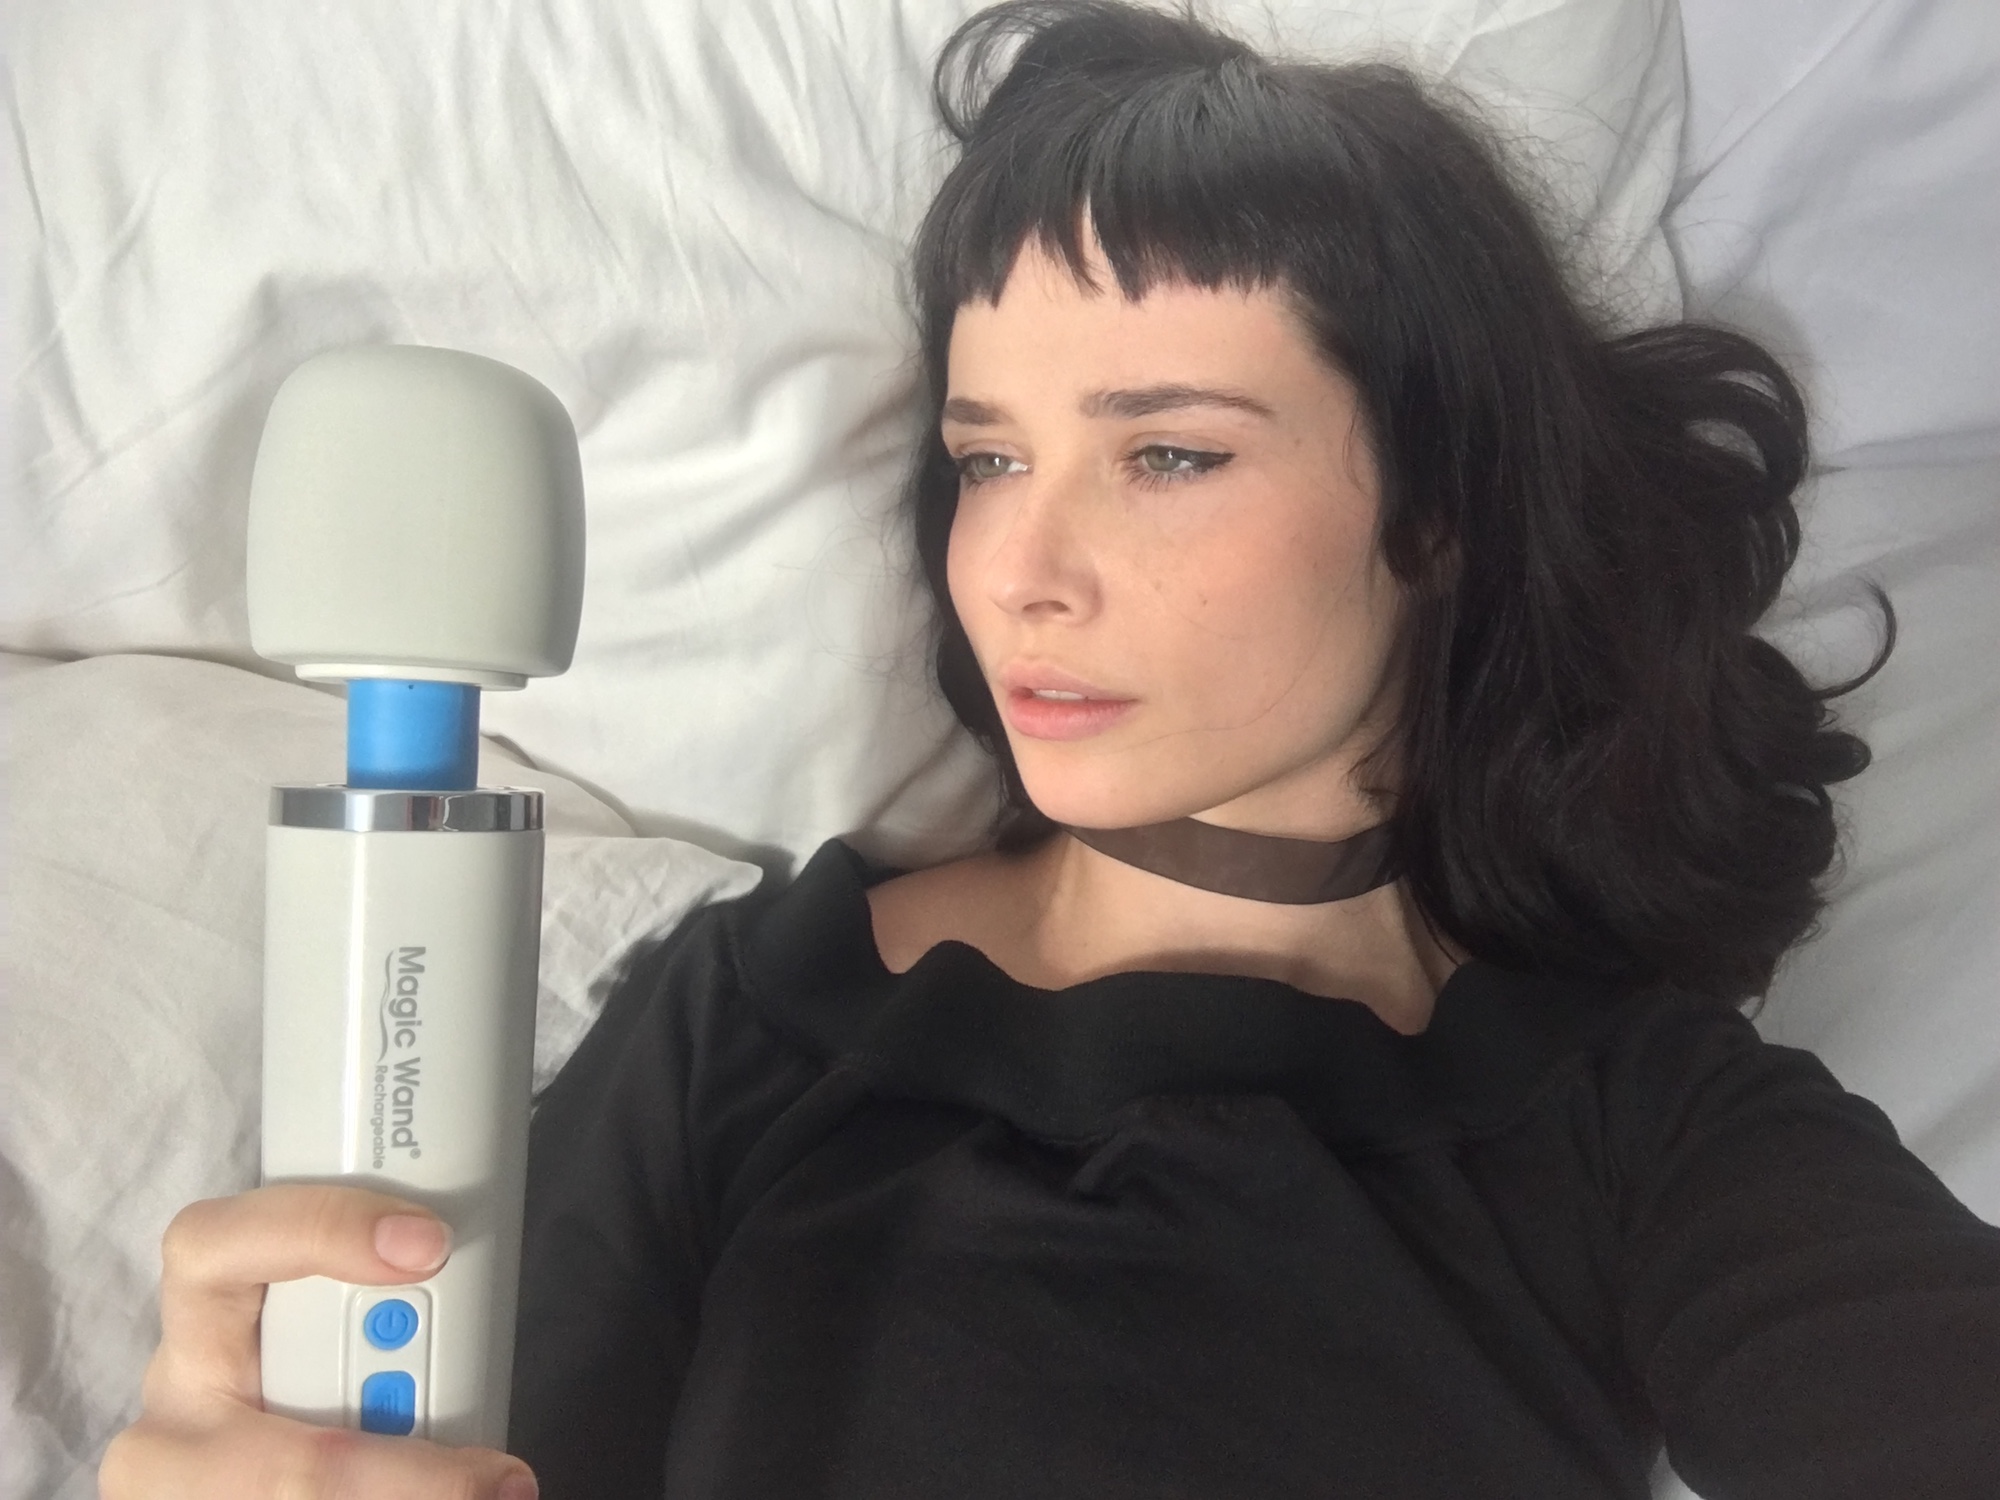 Hitachi Magic Wand Orgasm - Huge Vibrators May Scare Men, but They're Really, Really ...